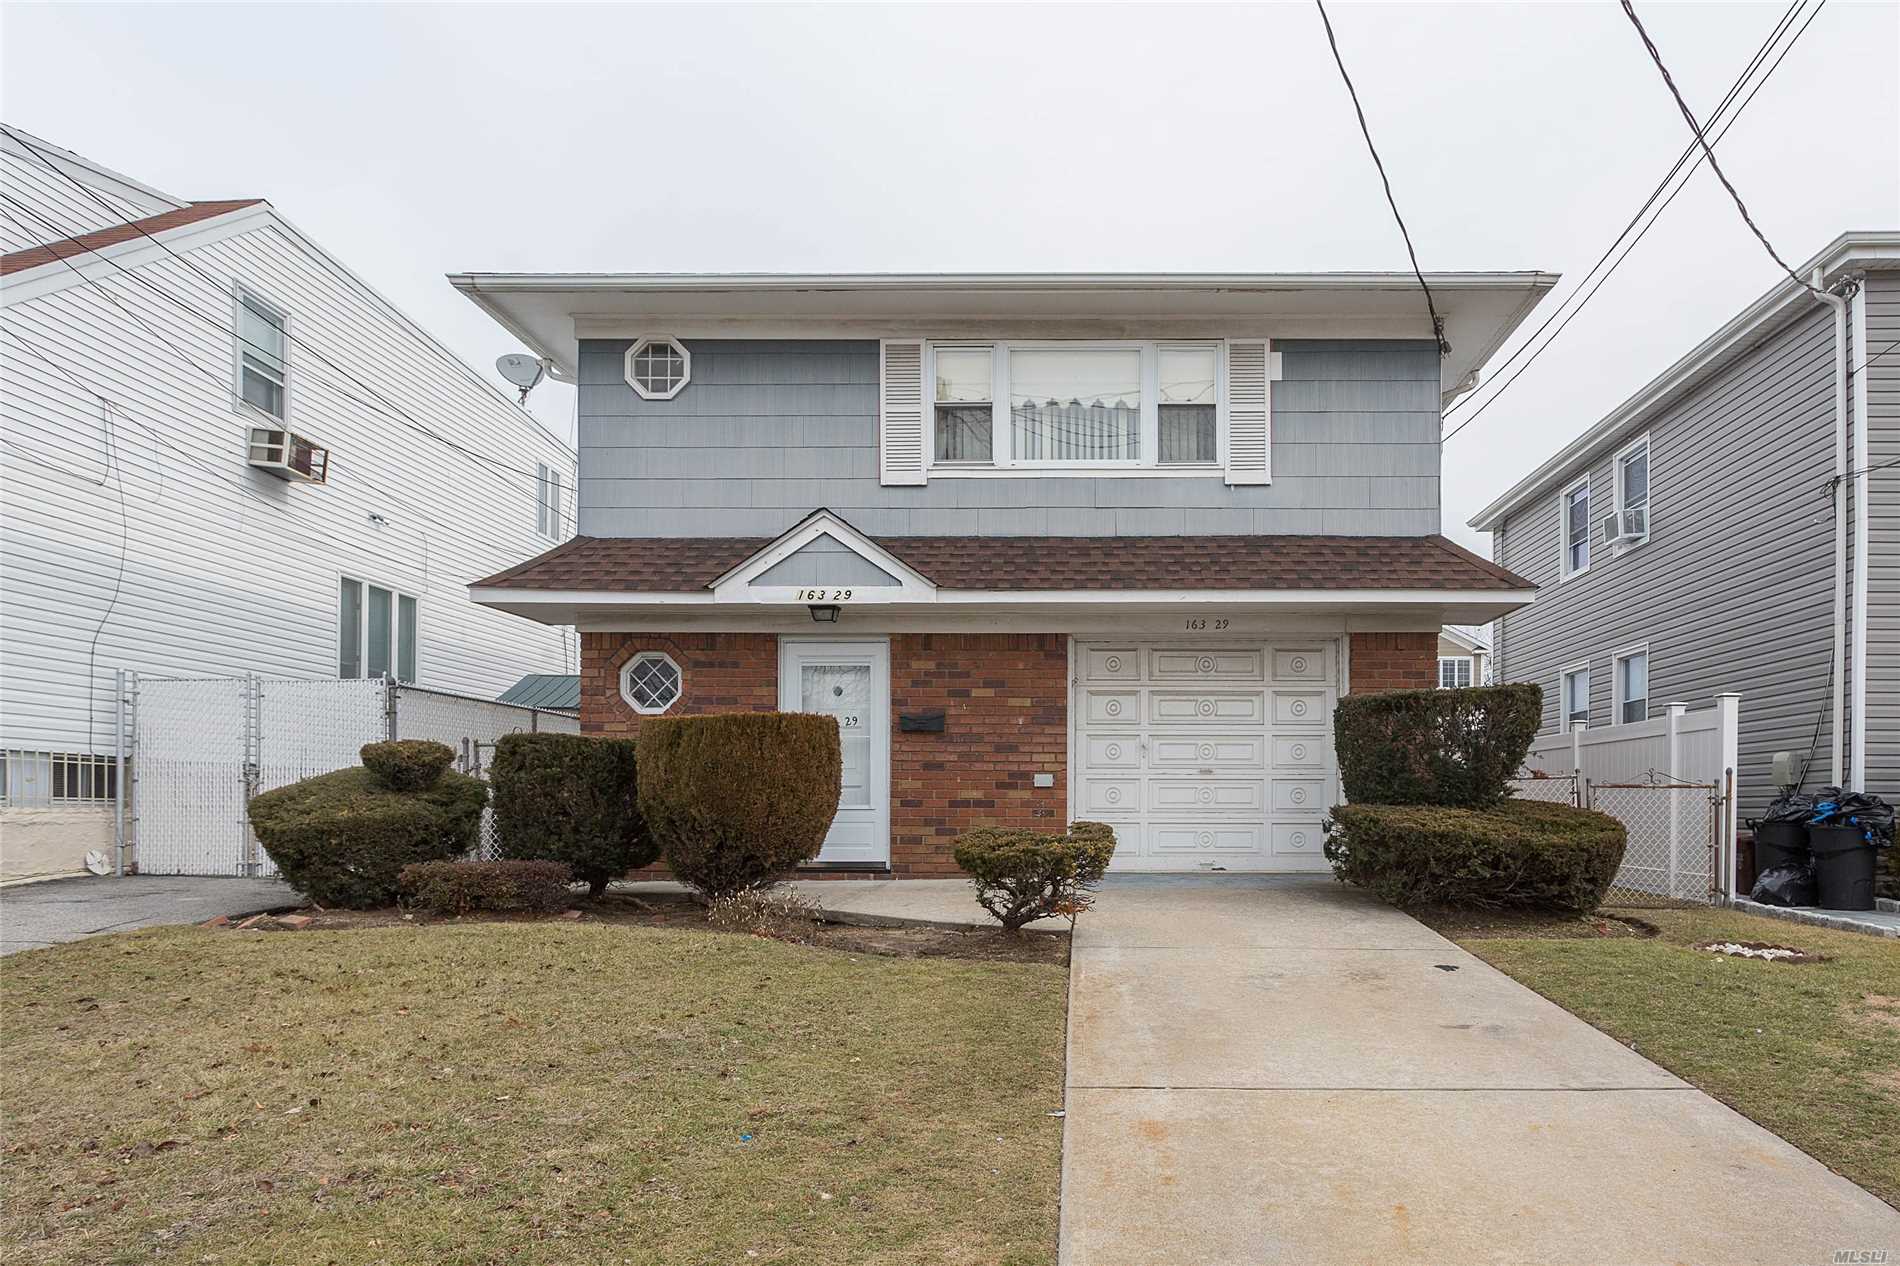 Great Potential House In The Heart Of Howard Beach Use As A Mother-Daughter, 1st Floor Recently Updated Features 2 Bedrooms, California Kitchen, New Roof, New Water Tank, Boiler Only 5 Years Old, Central Heat, Spacious Bedrooms,  Heated Garage. Nice Backyard Great For Entertainment.  Must See To Appreciate It.